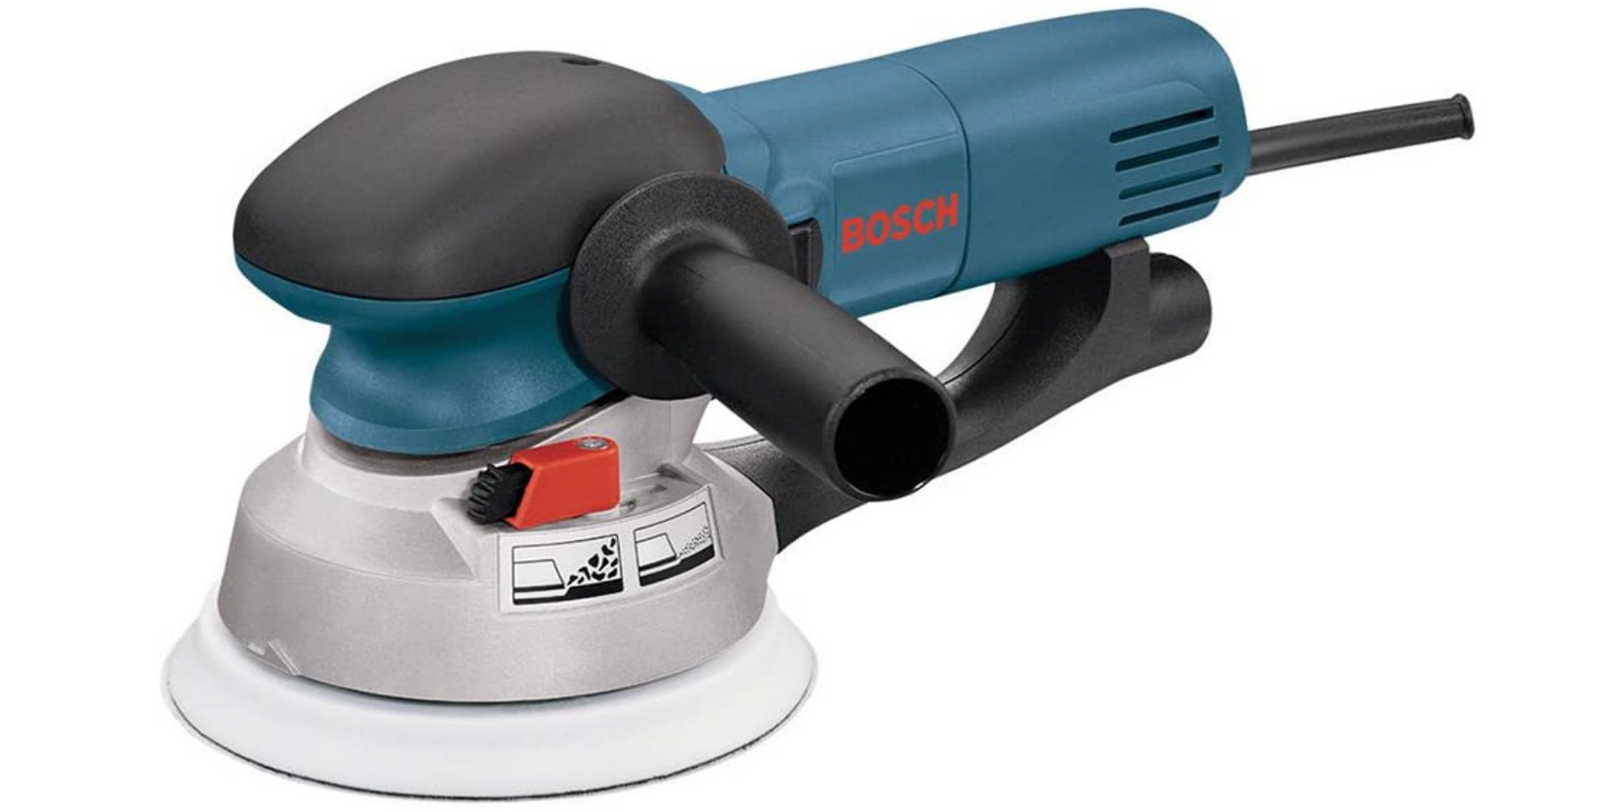 Bosch 1250DEVS product image of a black and cyan sander with a grey sander head.